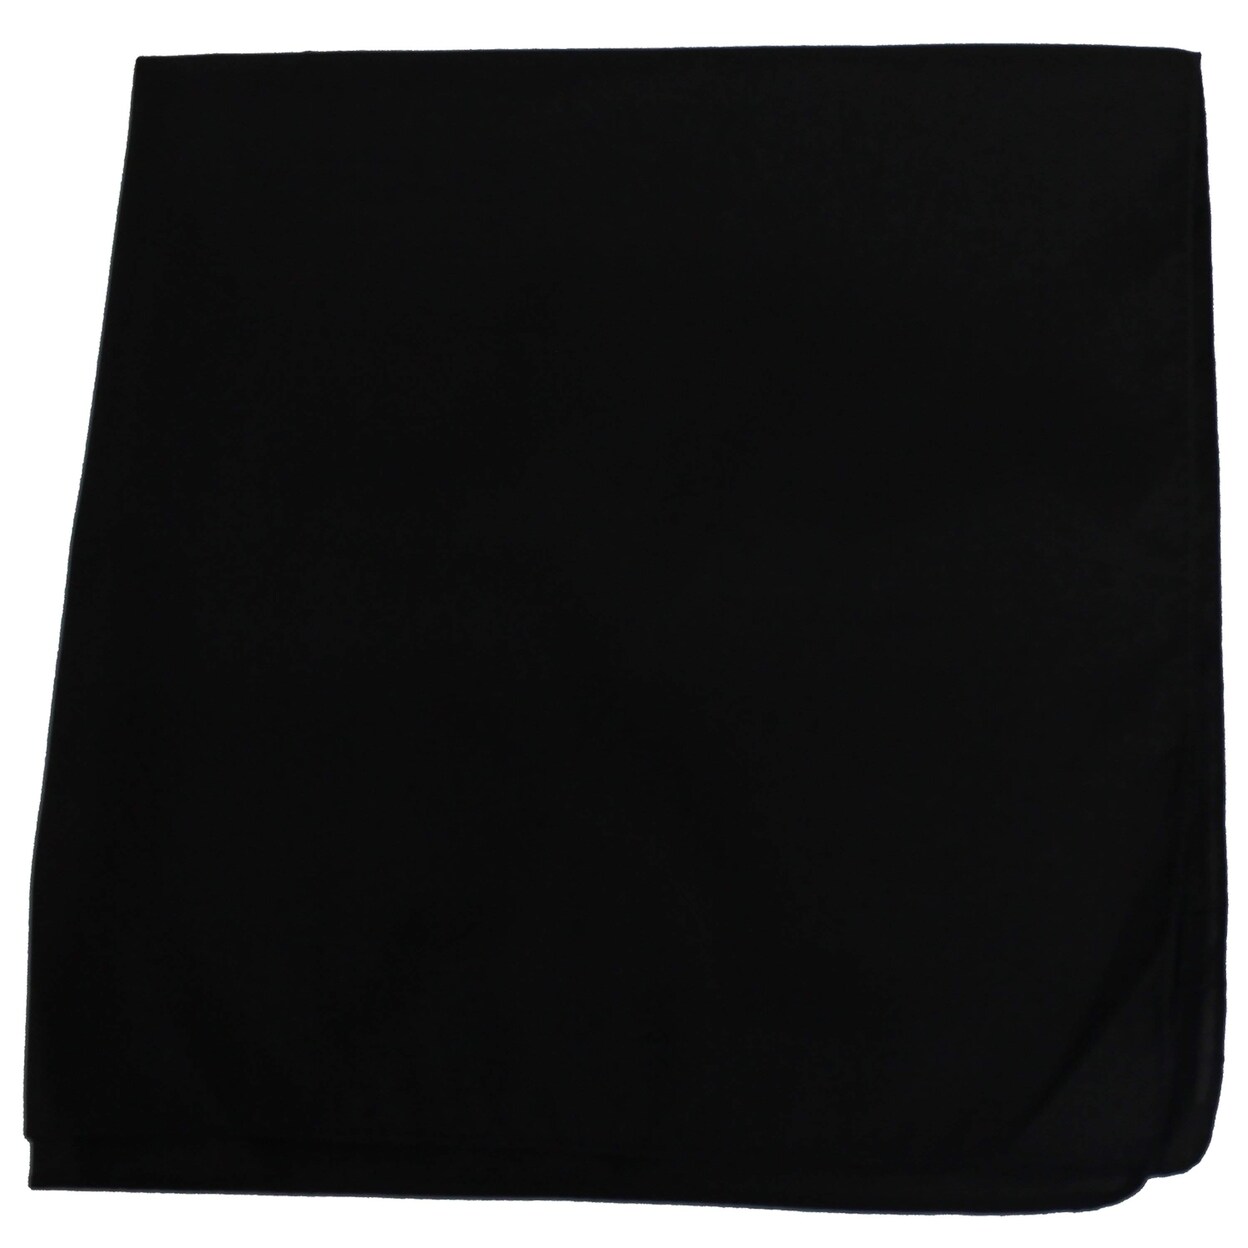 Daily Basic 12 Pack   Solid 100% Cotton 22 in x 22 in Bandanas